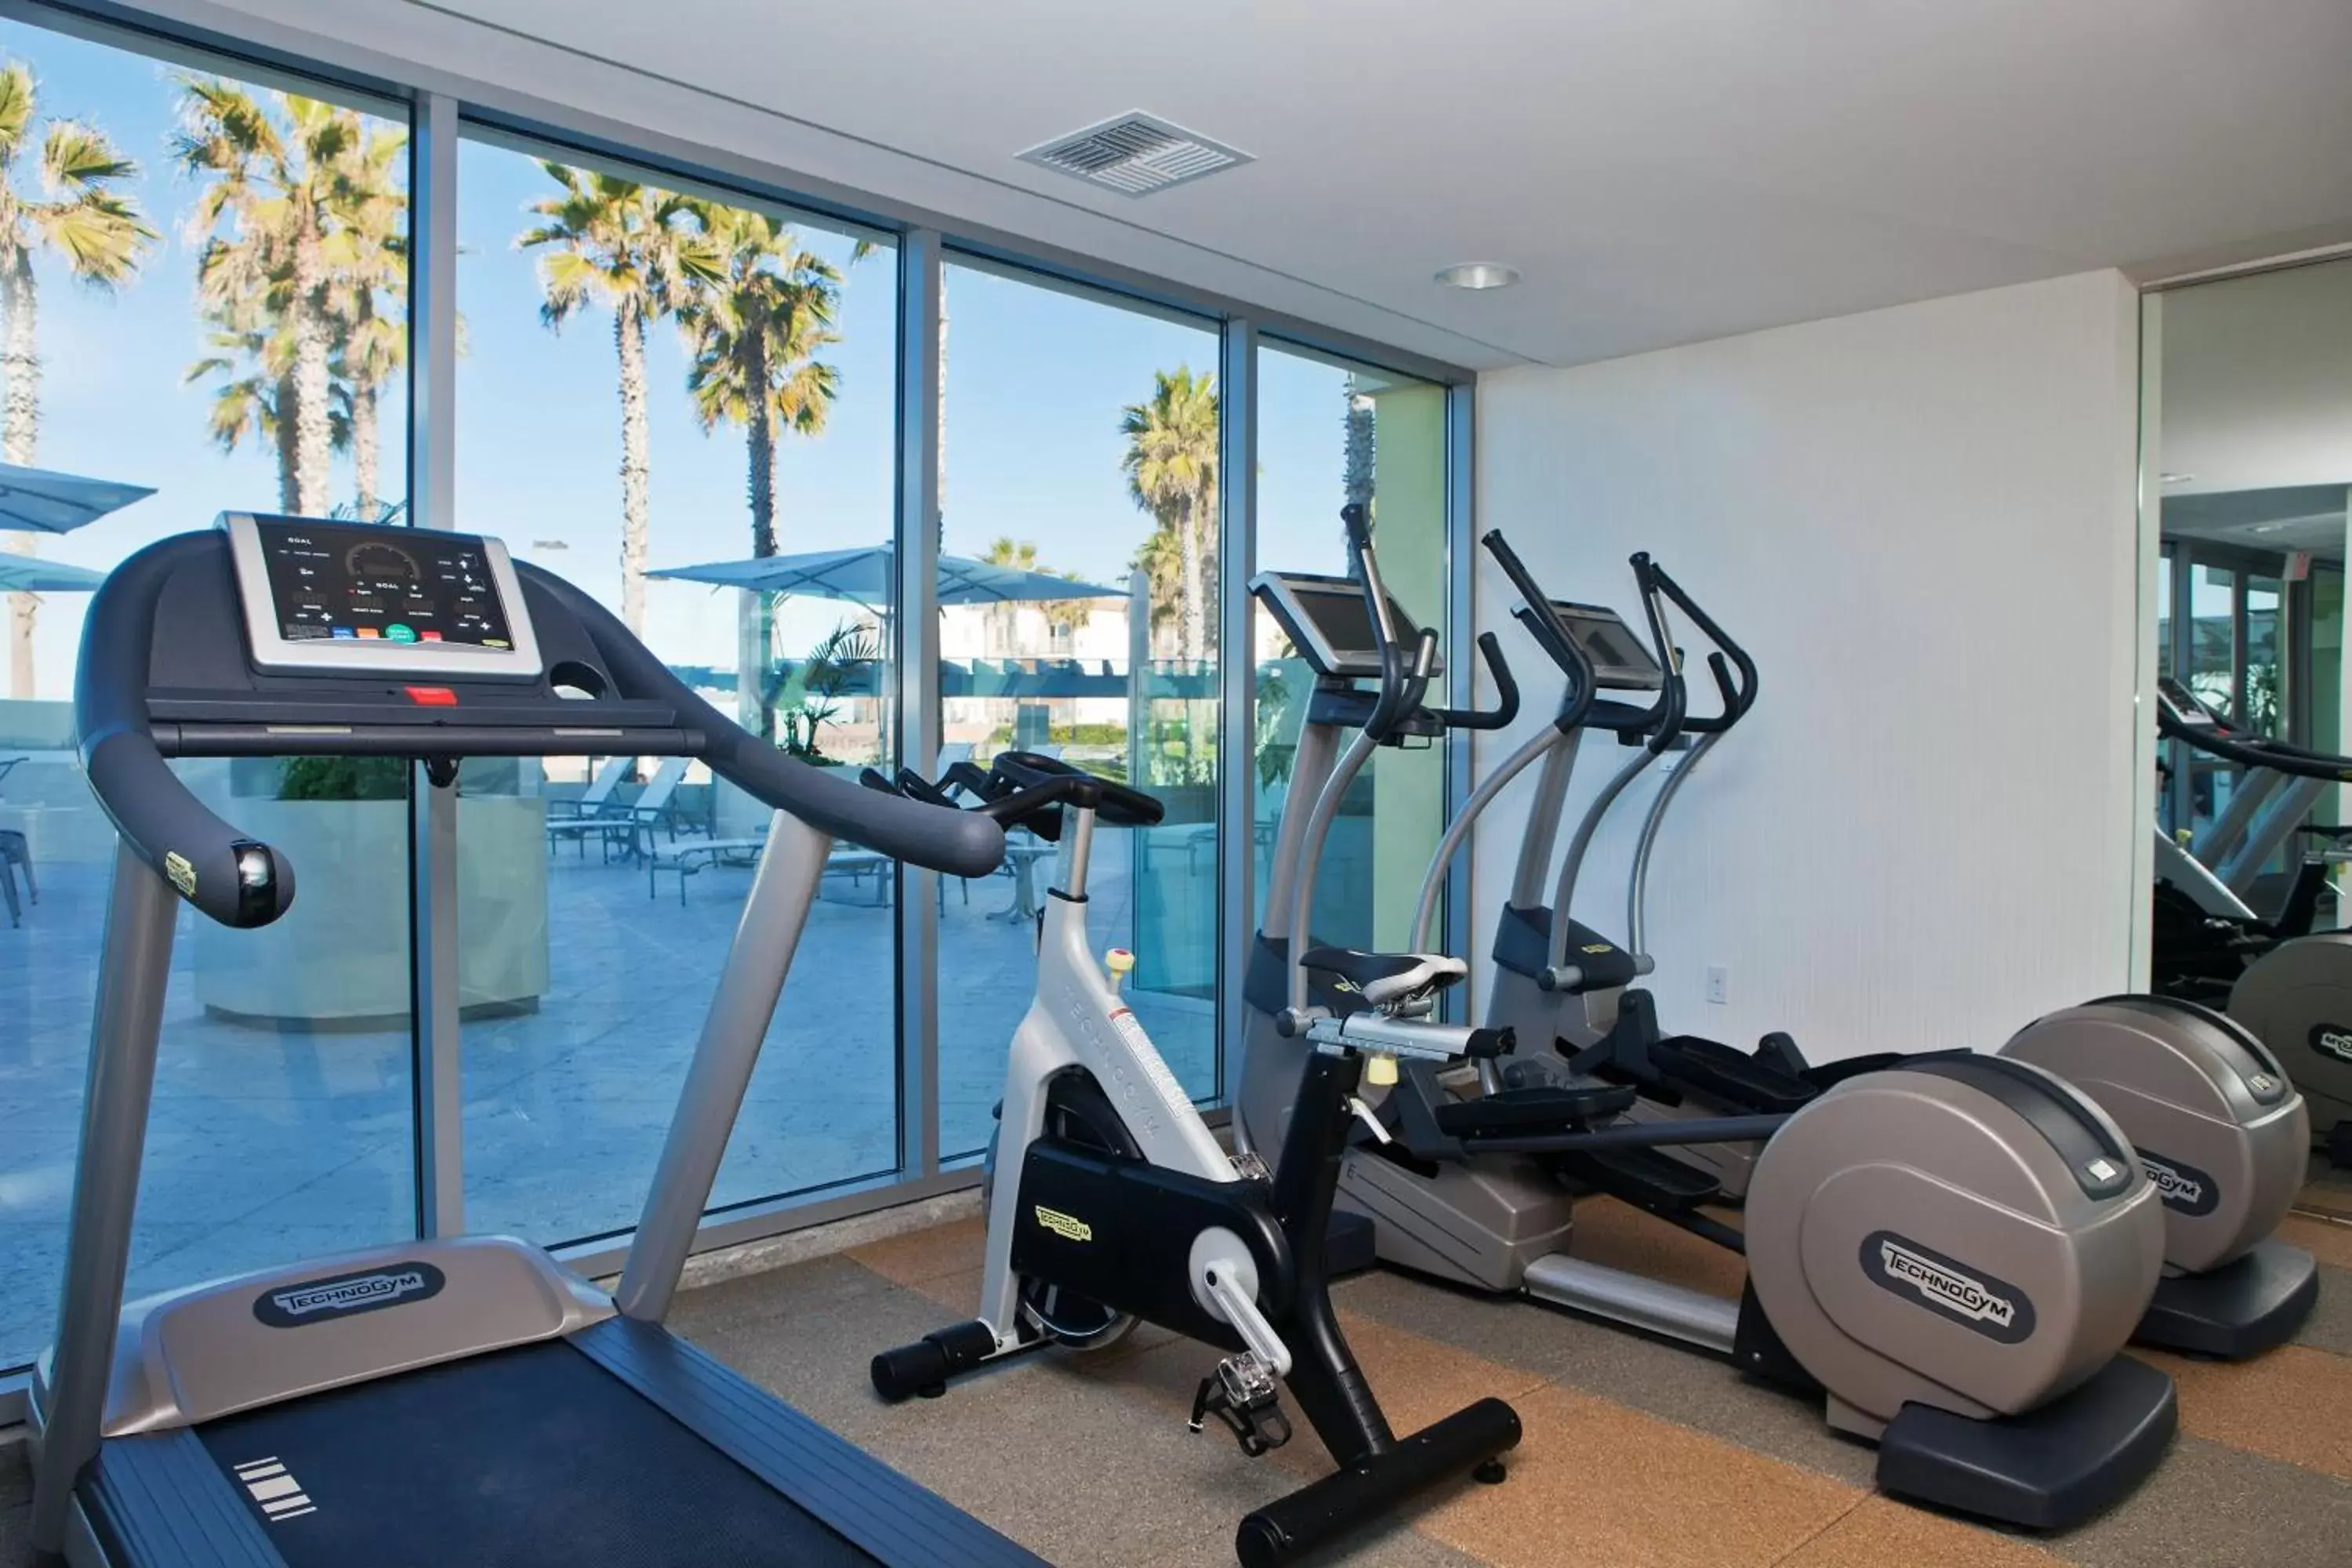 Fitness centre/facilities, Fitness Center/Facilities in Pier South Resort, Autograph Collection